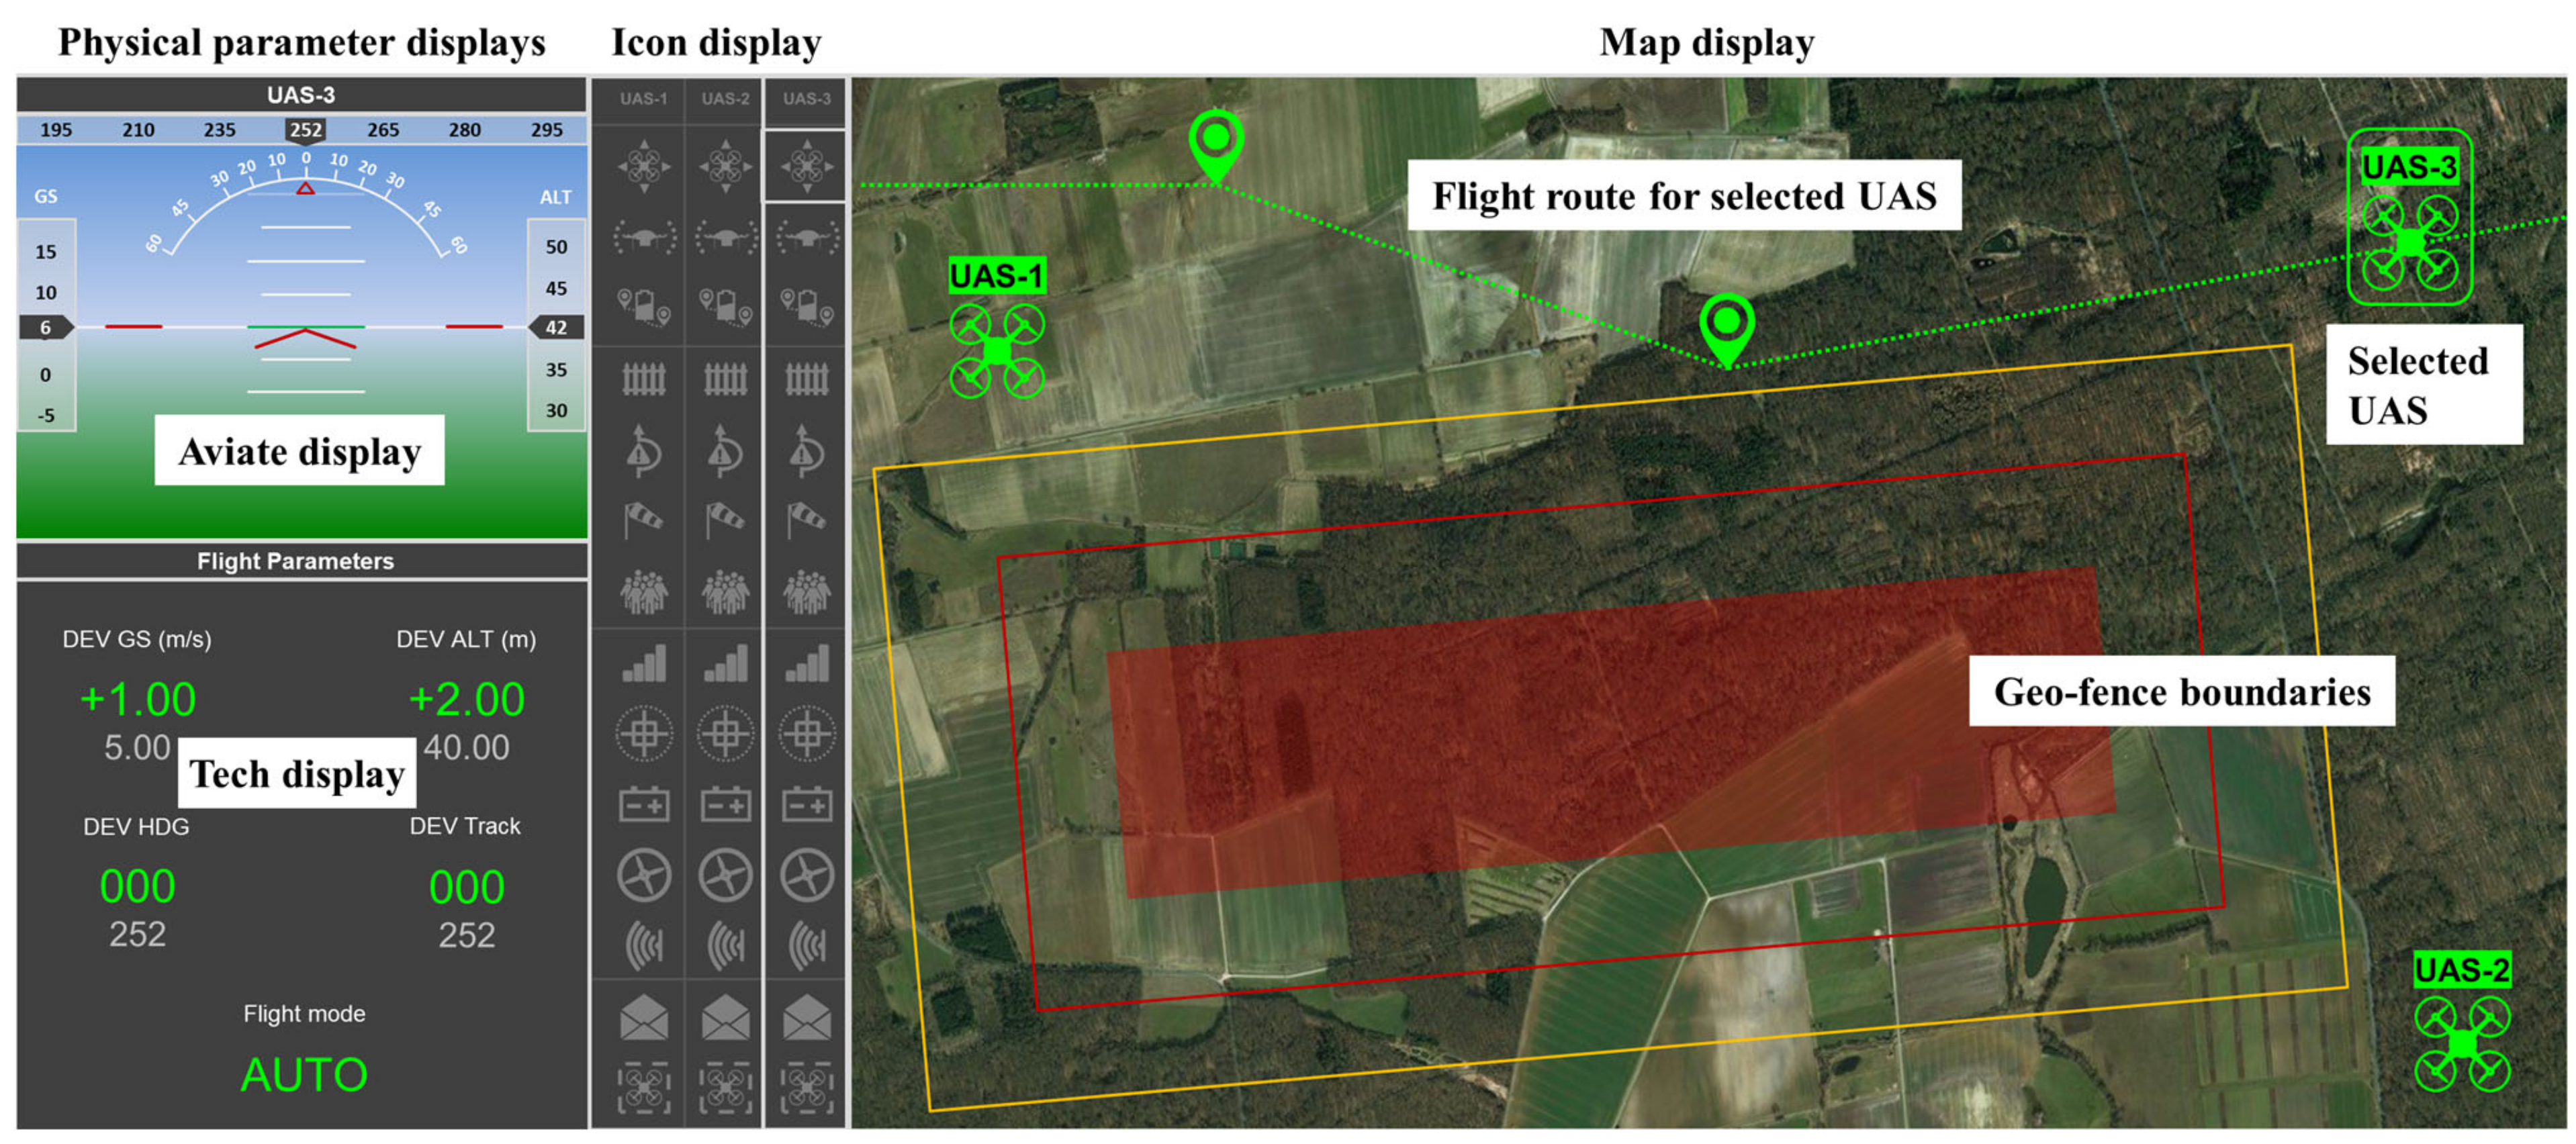 Aerospace | Free Full-Text | Human–Machine Interface Design for Monitoring  Safety Risks Associated with Operating Small Unmanned Aircraft Systems in  Urban Areas | HTML